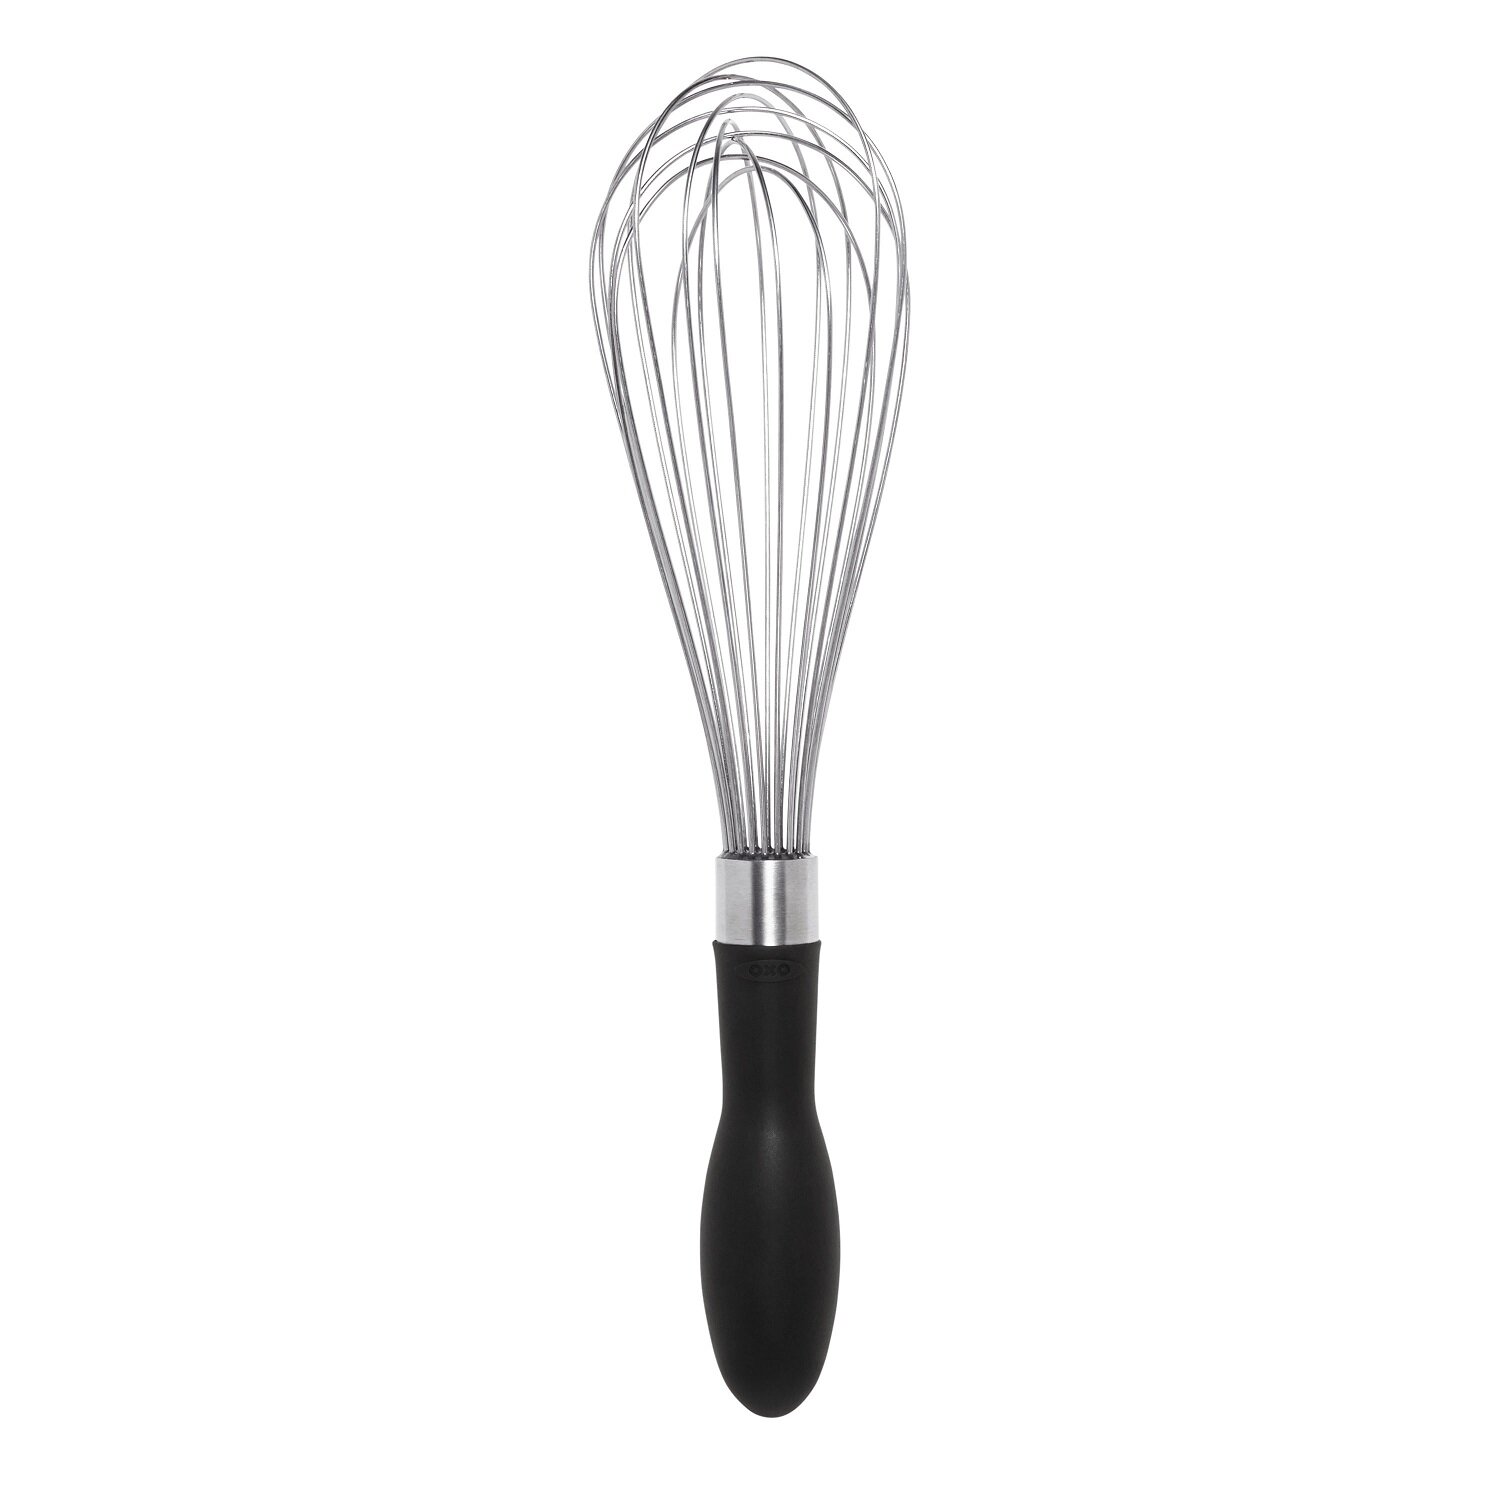 OXO Good Grips 10 1/8 Flat Whip / Whisk with Rubber Handle 74391